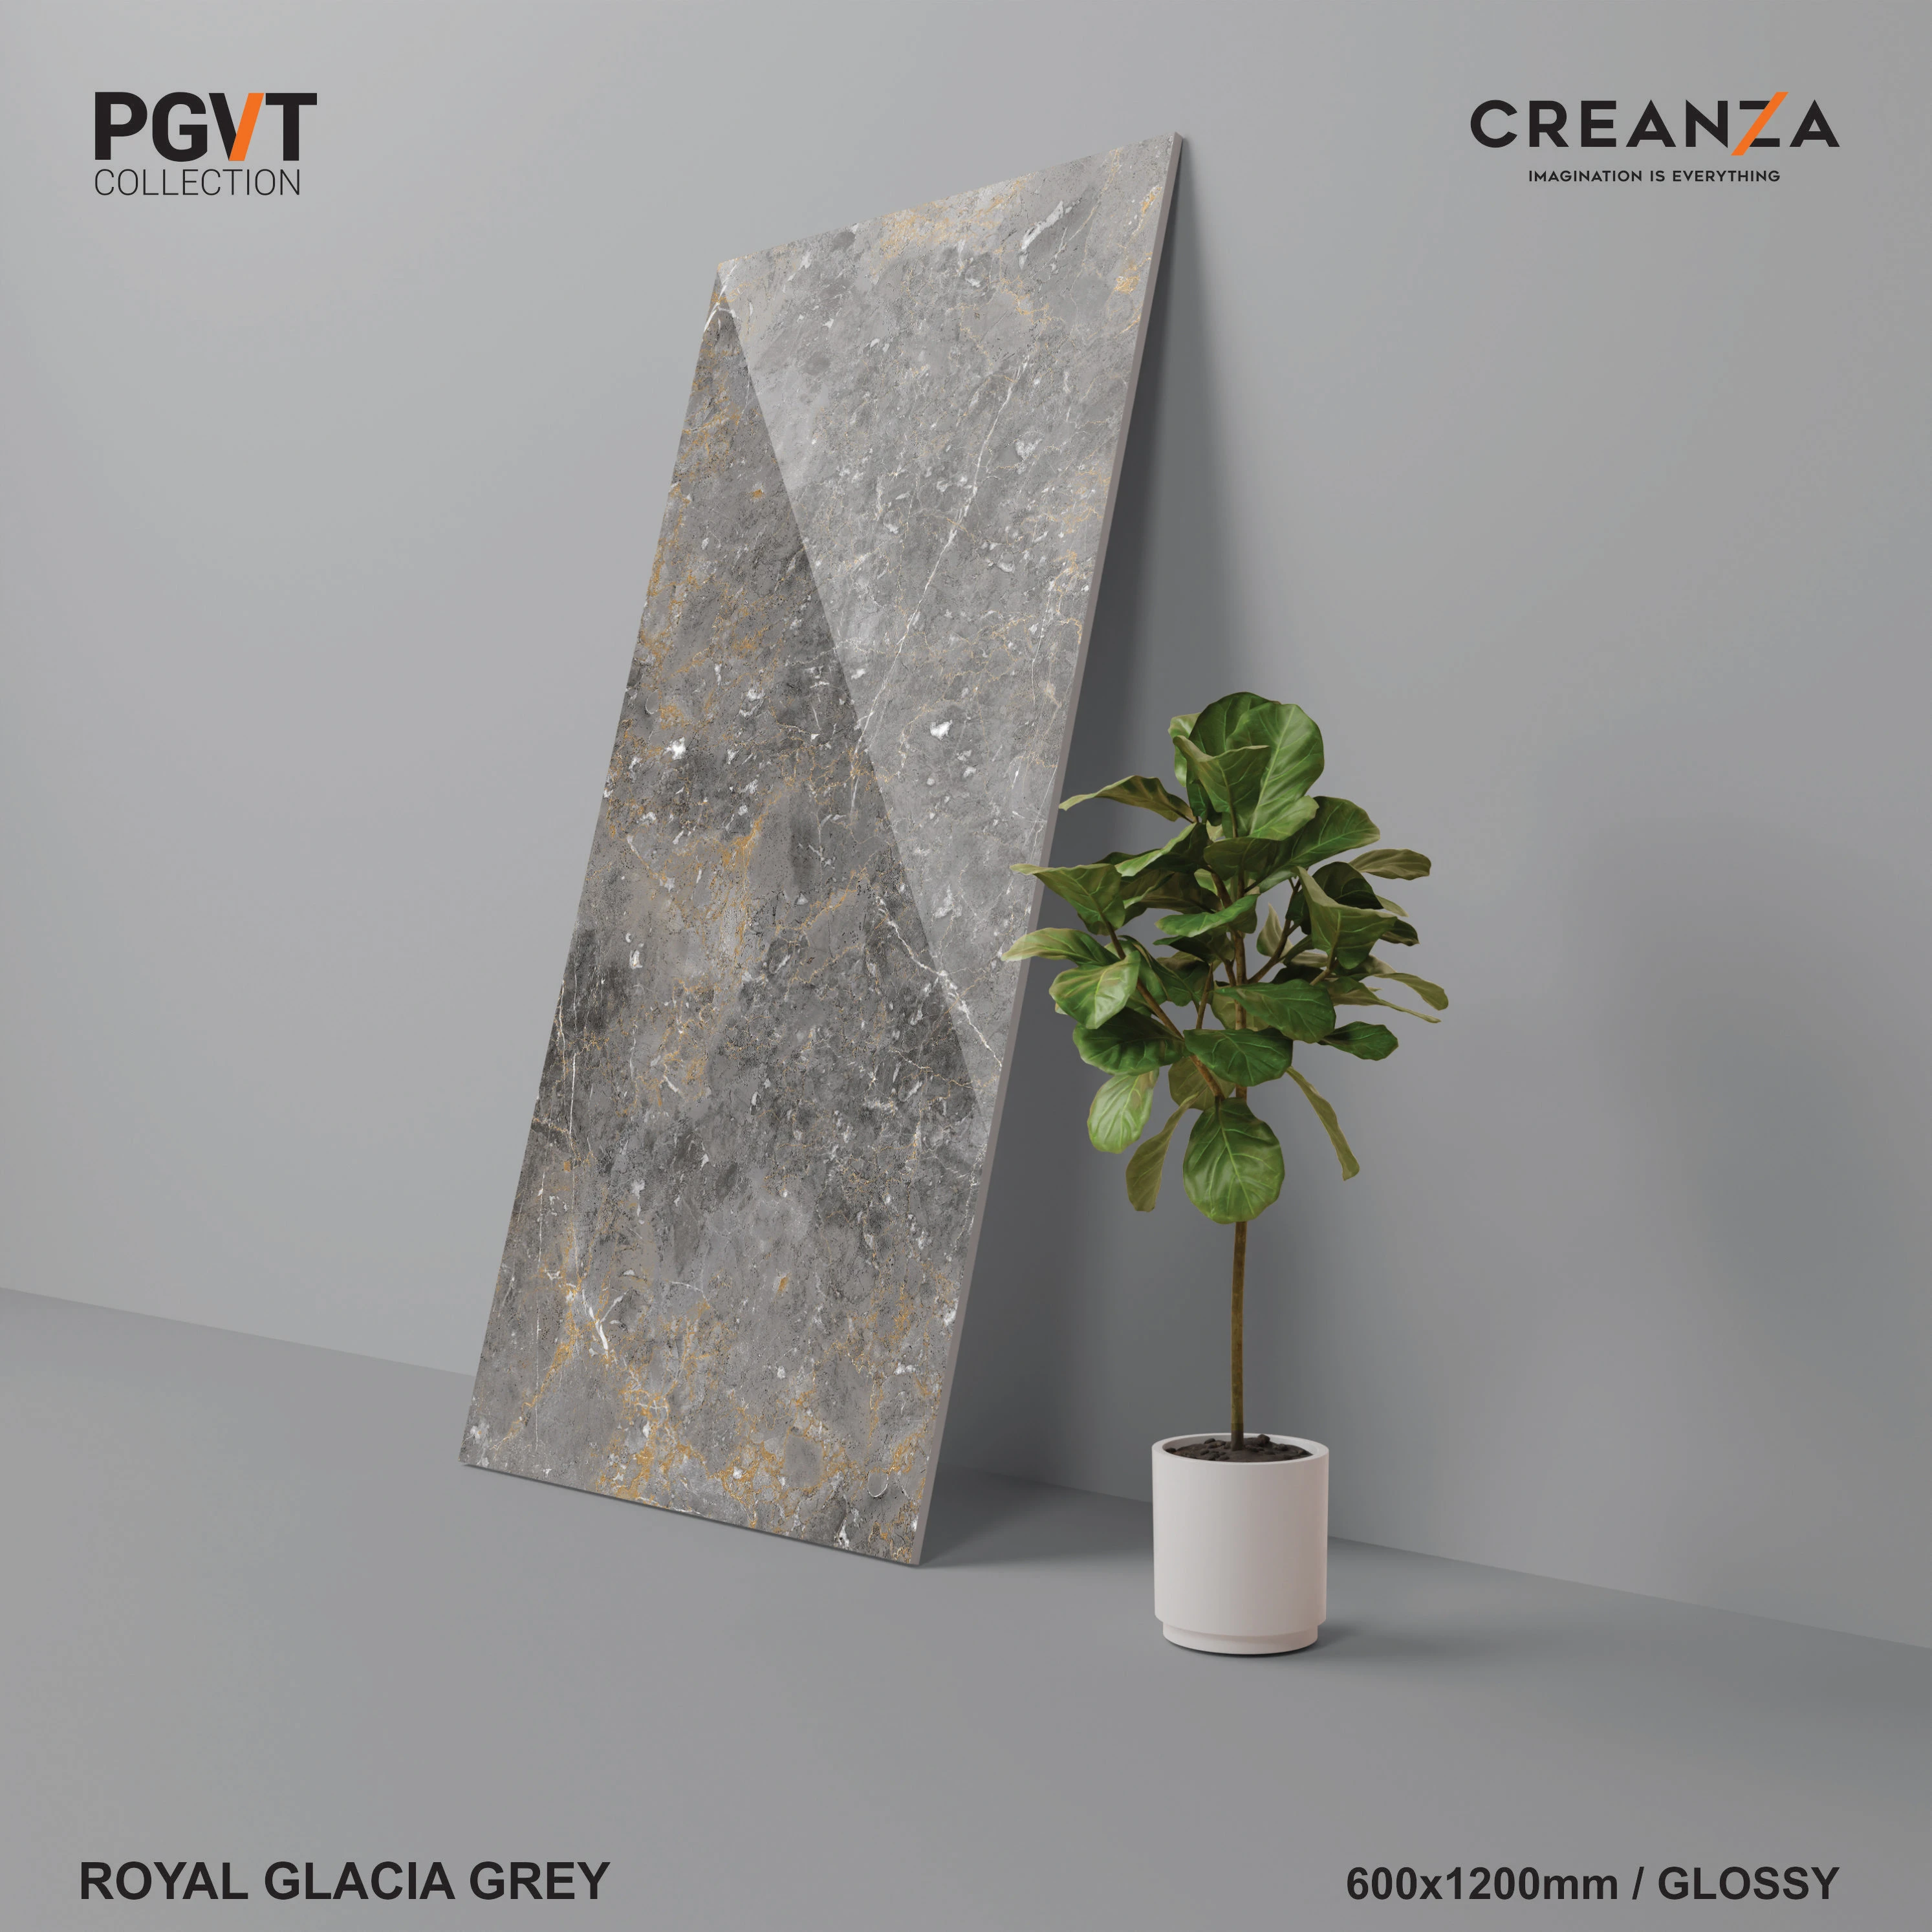 600x1200mm grey porcelian floor tiles with full polish finish marble look hot selling product in europe